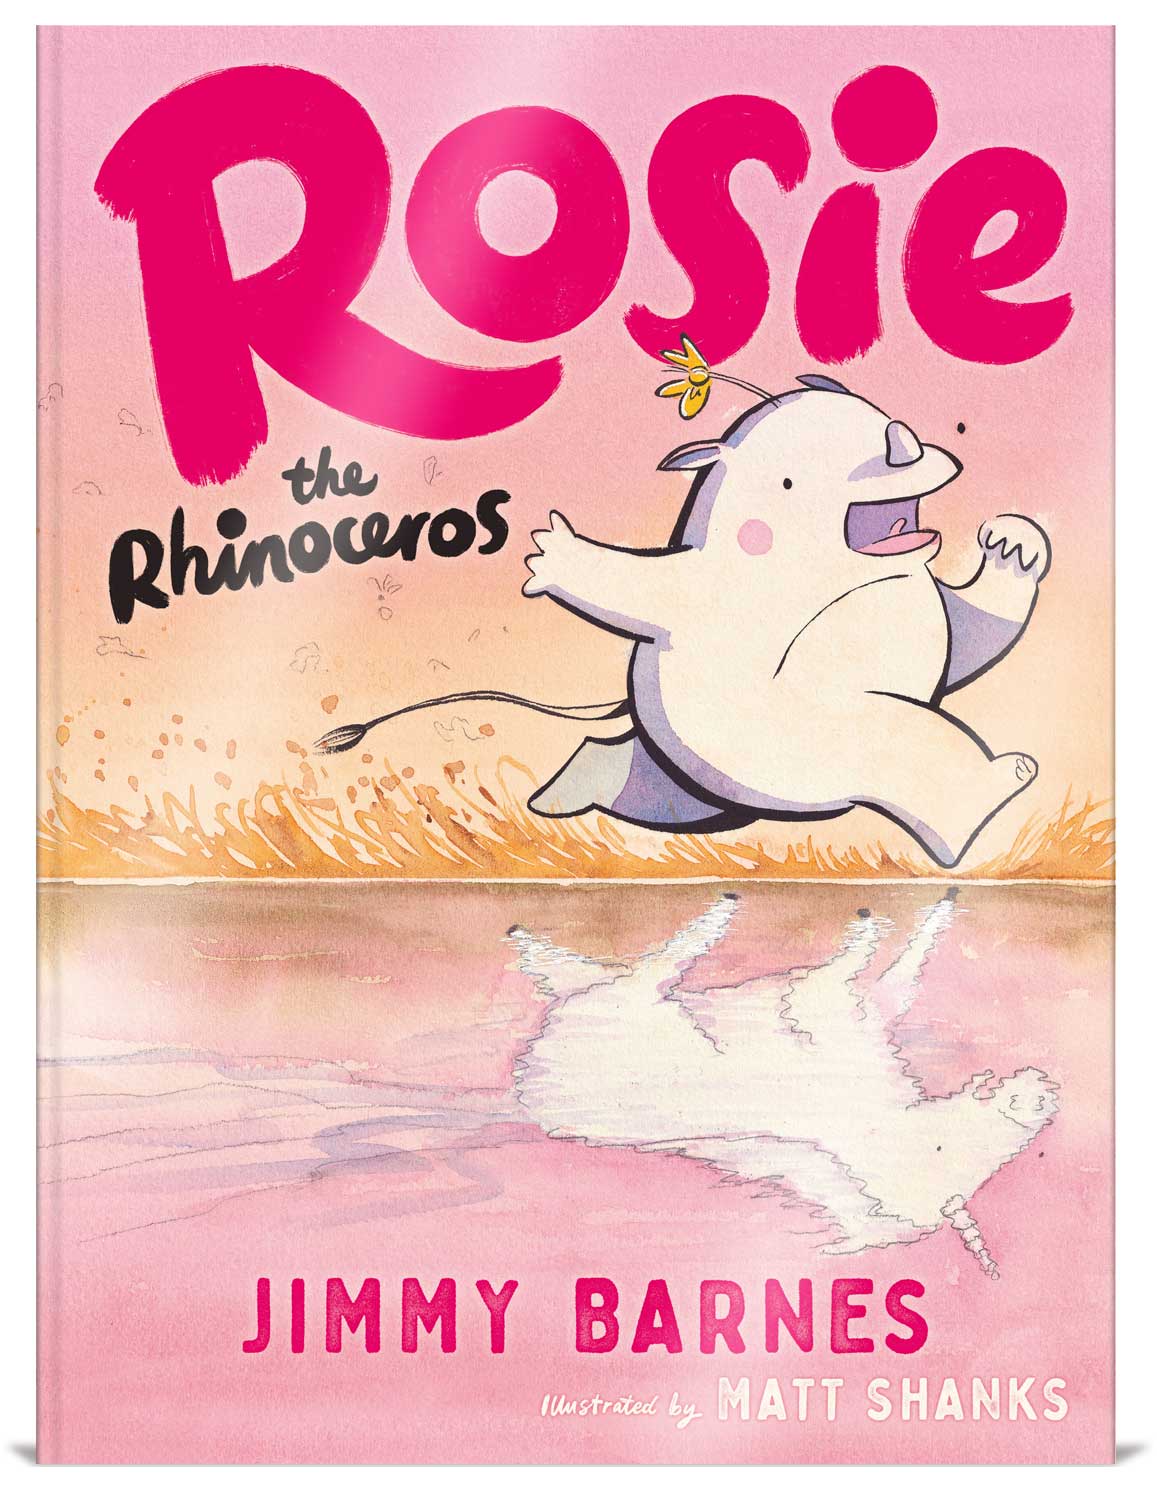 Cover image of the book: A white rhino running alongside a river with a unicorn reflected in it